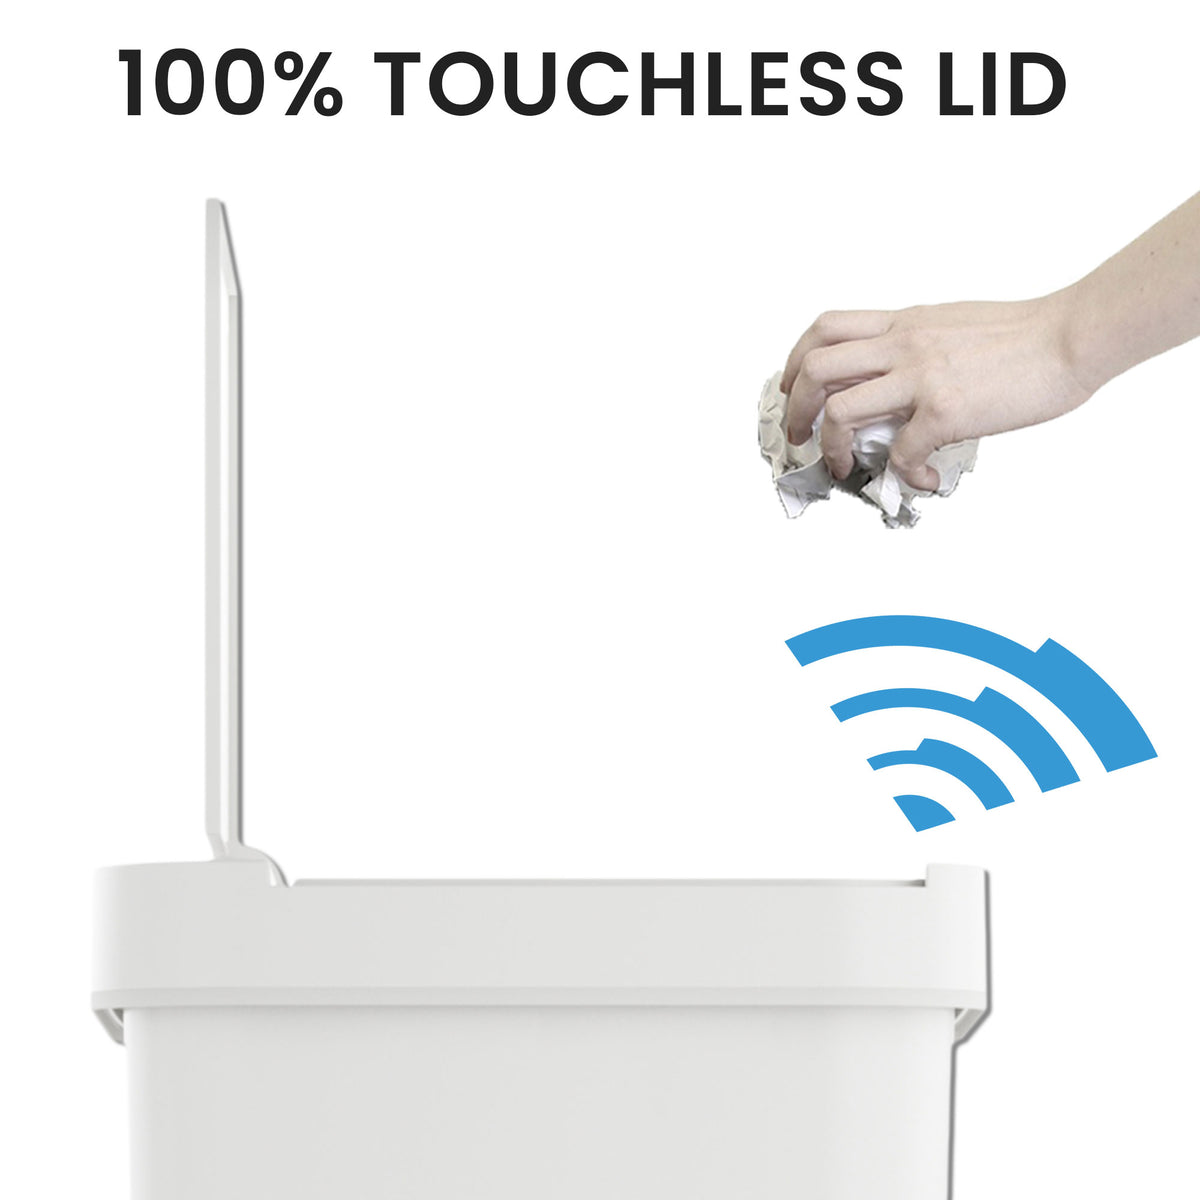 100% Touchless Lid